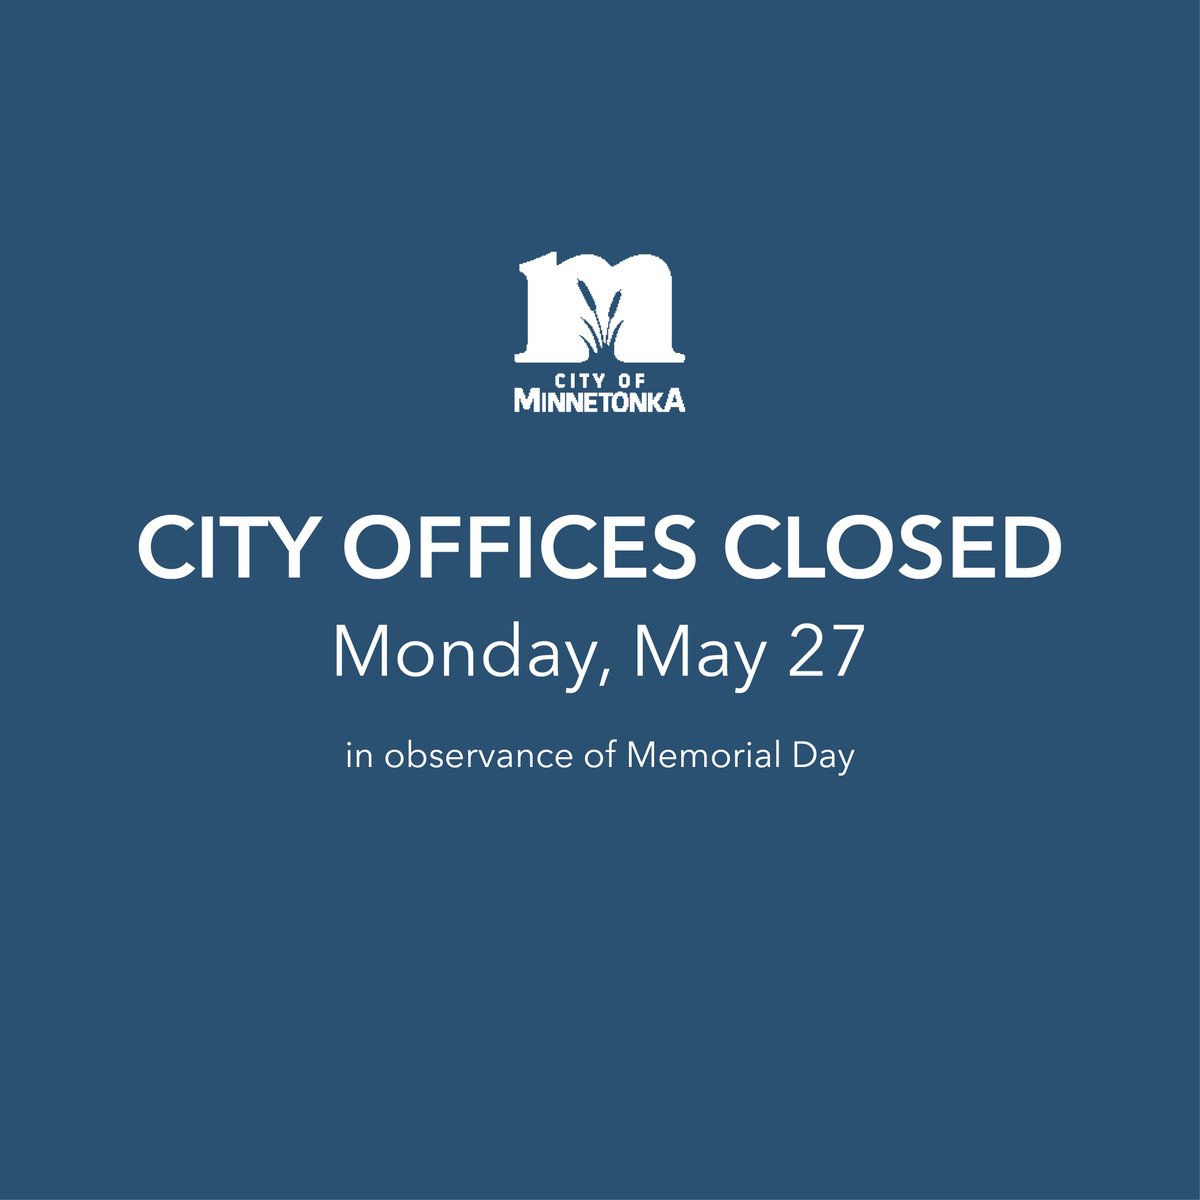 City offices will be closed Monday, May 27 in observance of Memorial Day. Take the time to honor our fallen military for their sacrifice. We will return to regular office hours Tuesday, May 28.